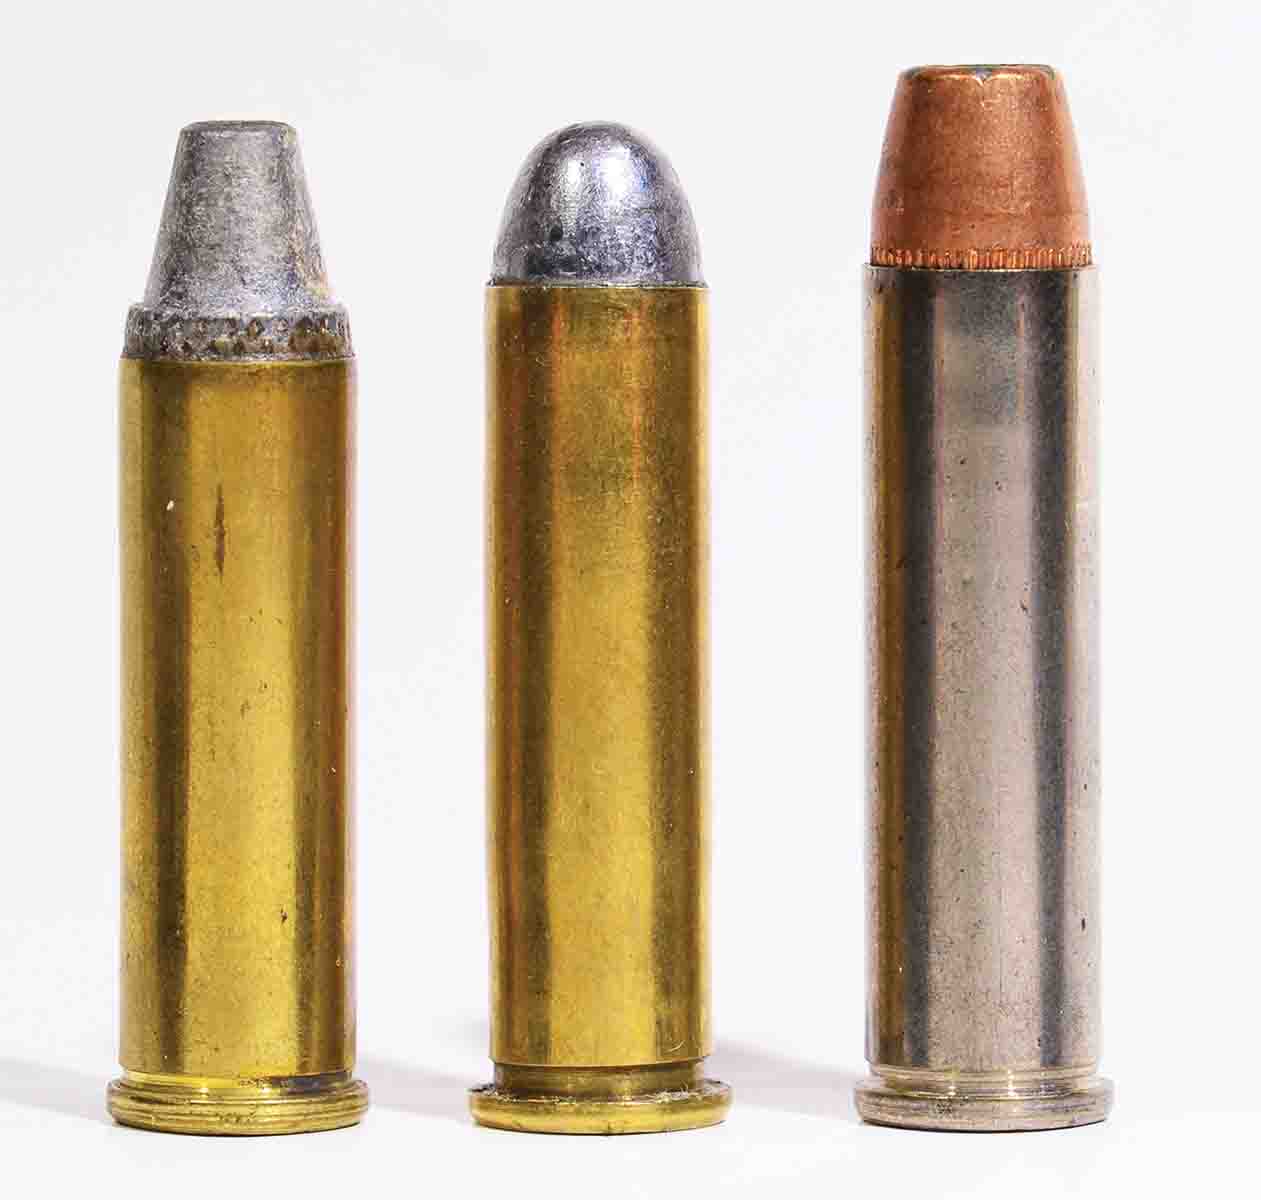 British rook cartridges were developed during the same period as the small- to mid-sized revolver cartridges, and are remarkably similar. Left to right: .32 H&R Magnum, .300 Rook Rifle and .327 Federal Magnum.